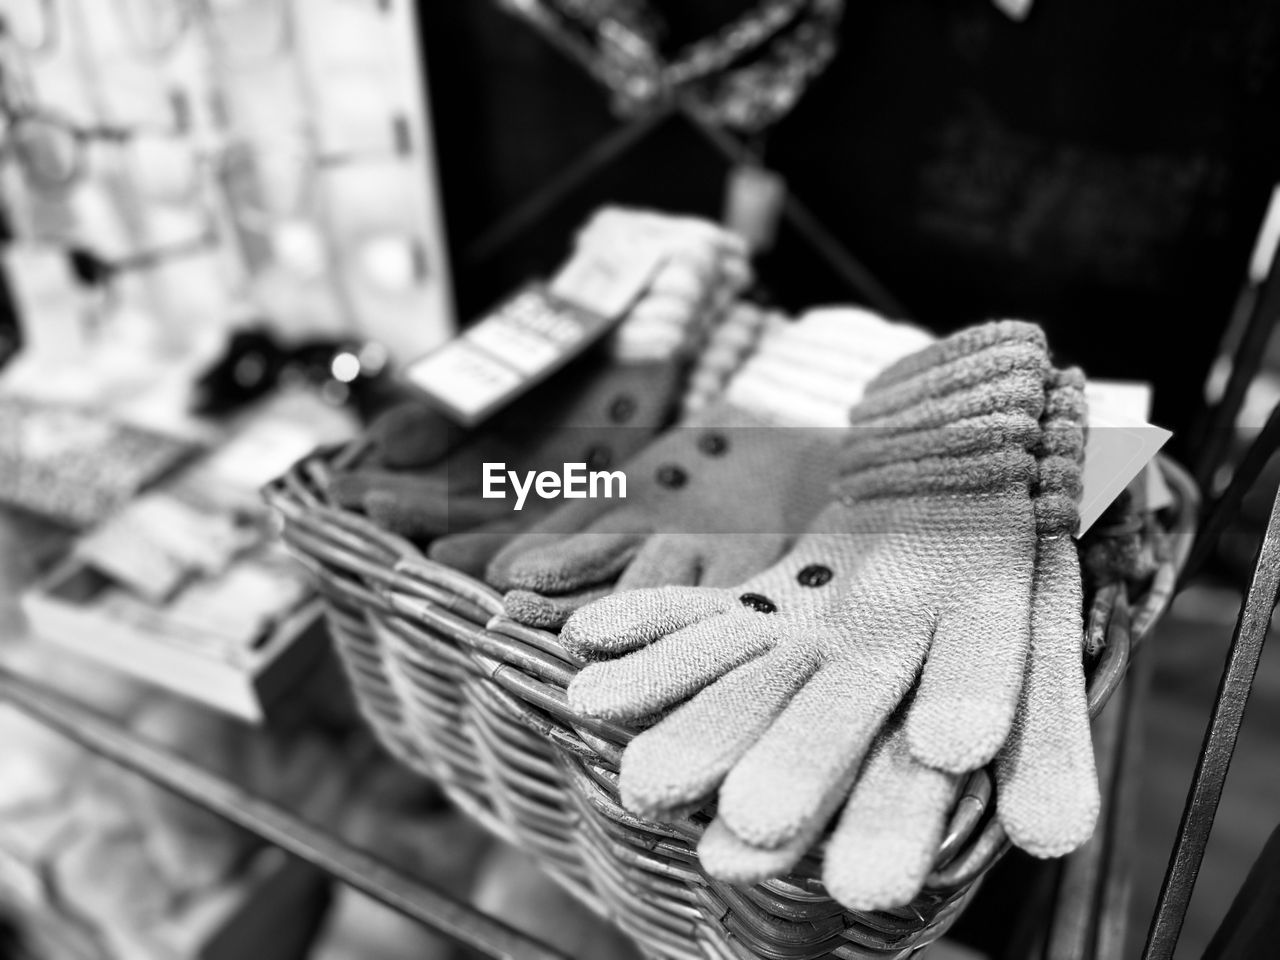 basket, black, black and white, white, focus on foreground, monochrome photography, no people, monochrome, container, retail, close-up, food, store, food and drink, market, day